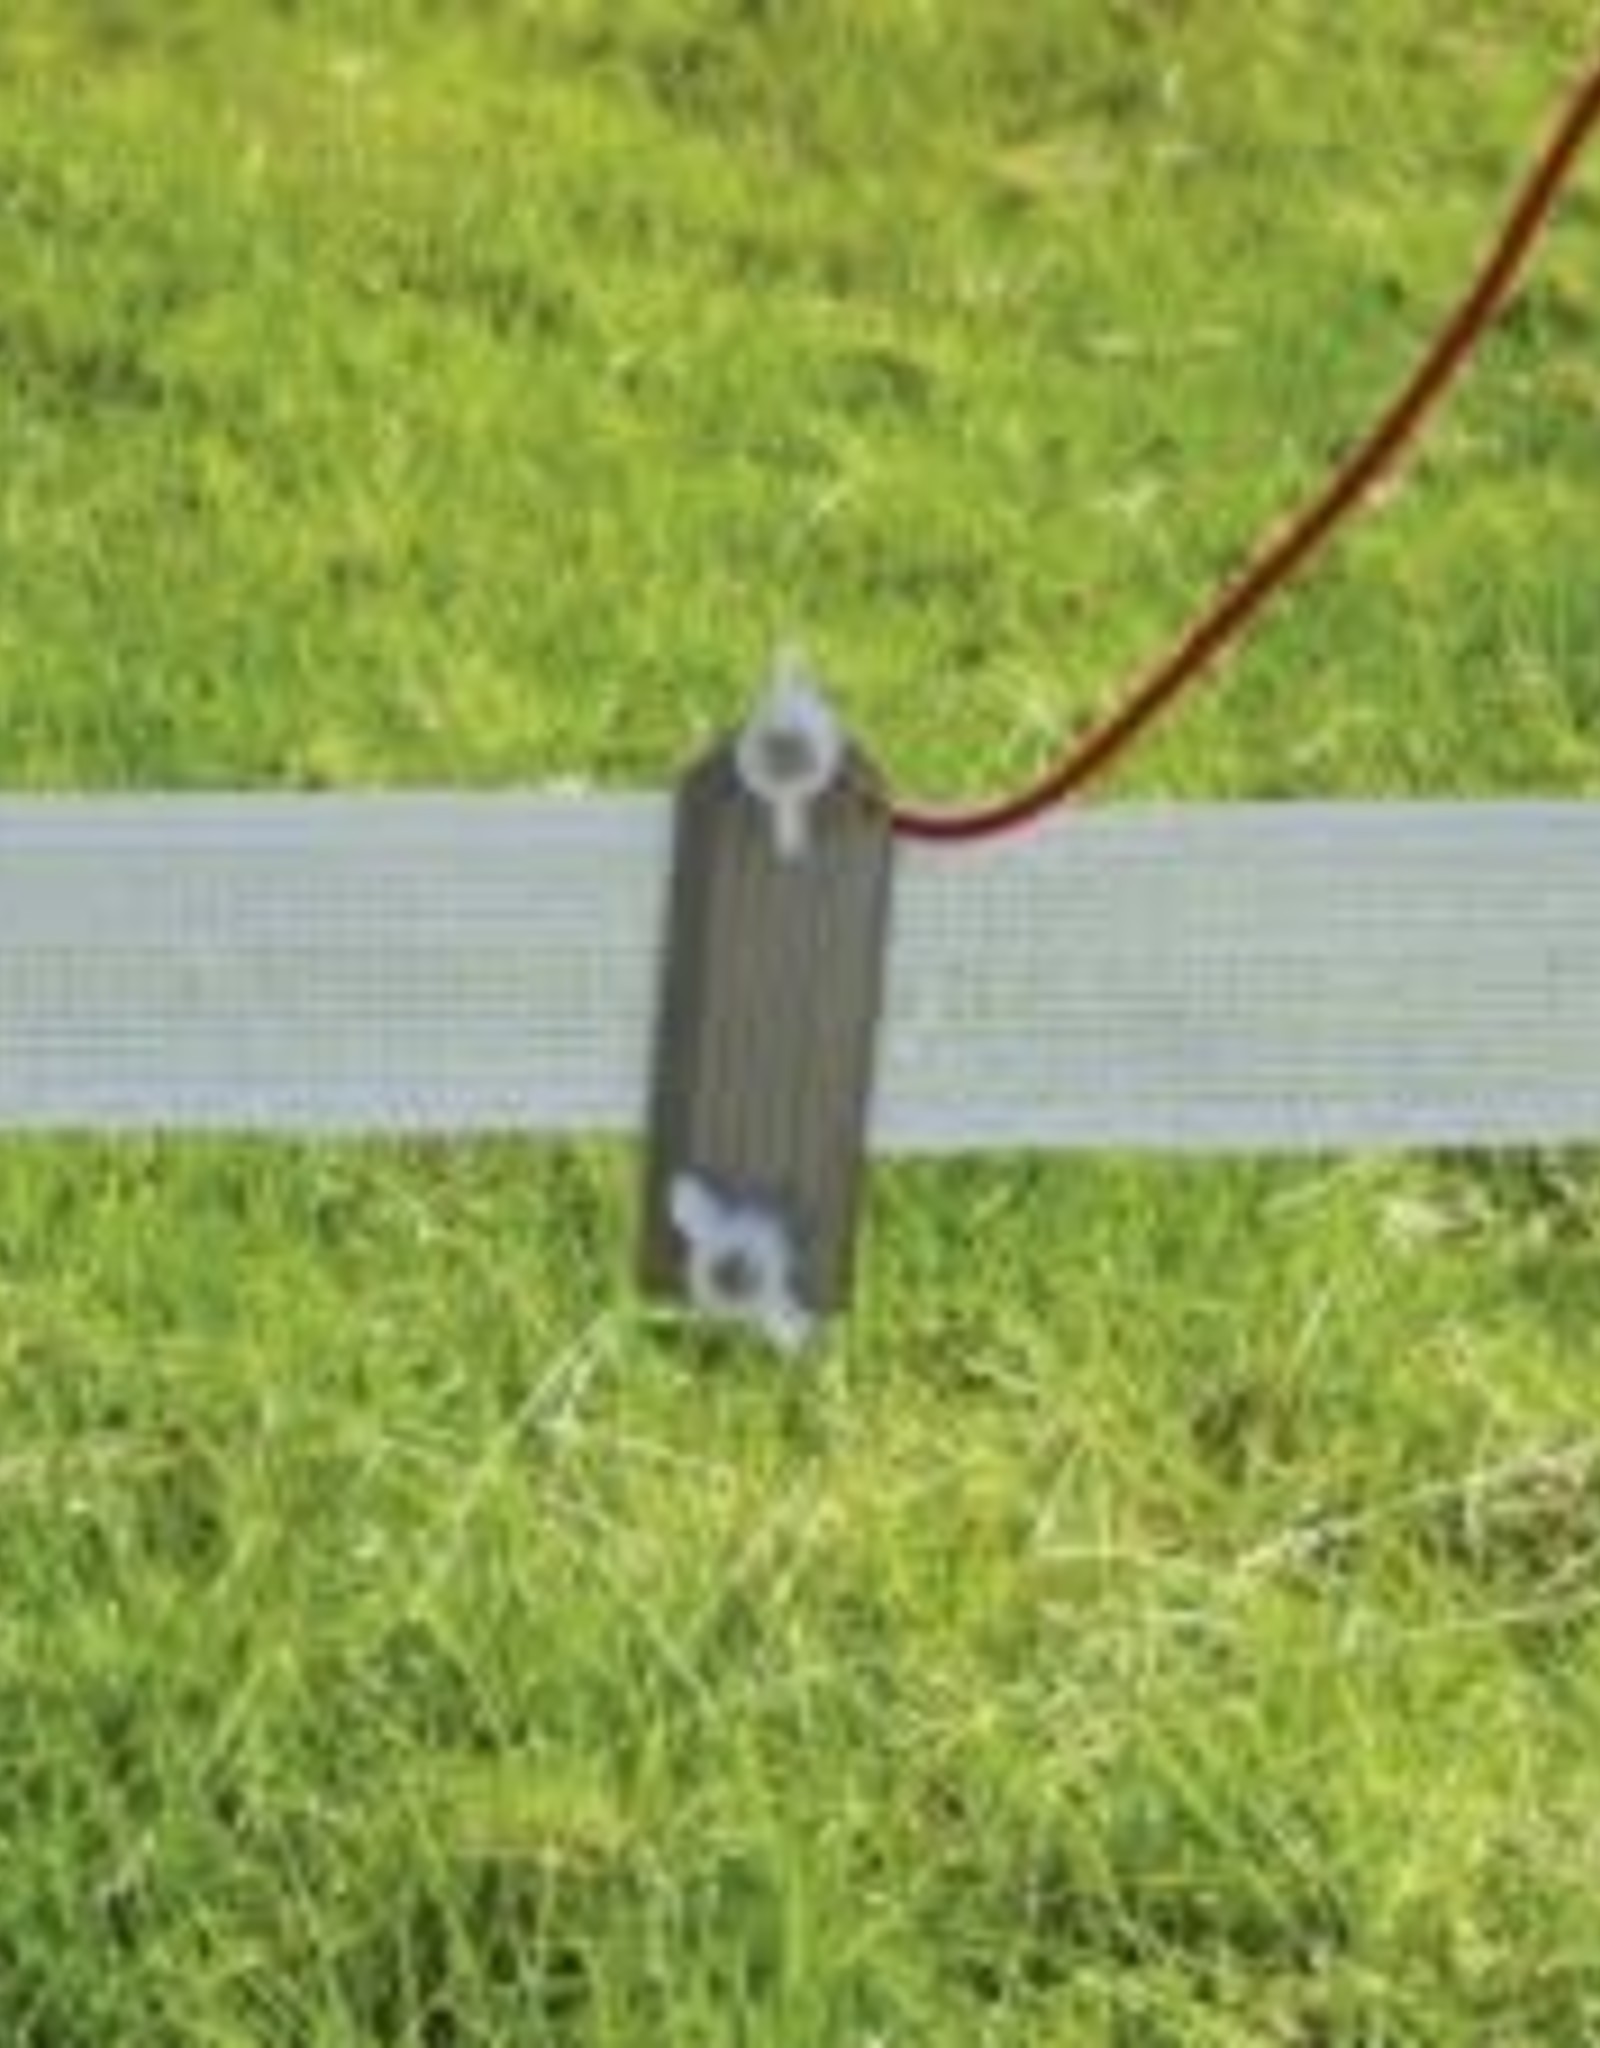 TRU-TEST Electric Fence Wide Tape to Fencer Connector